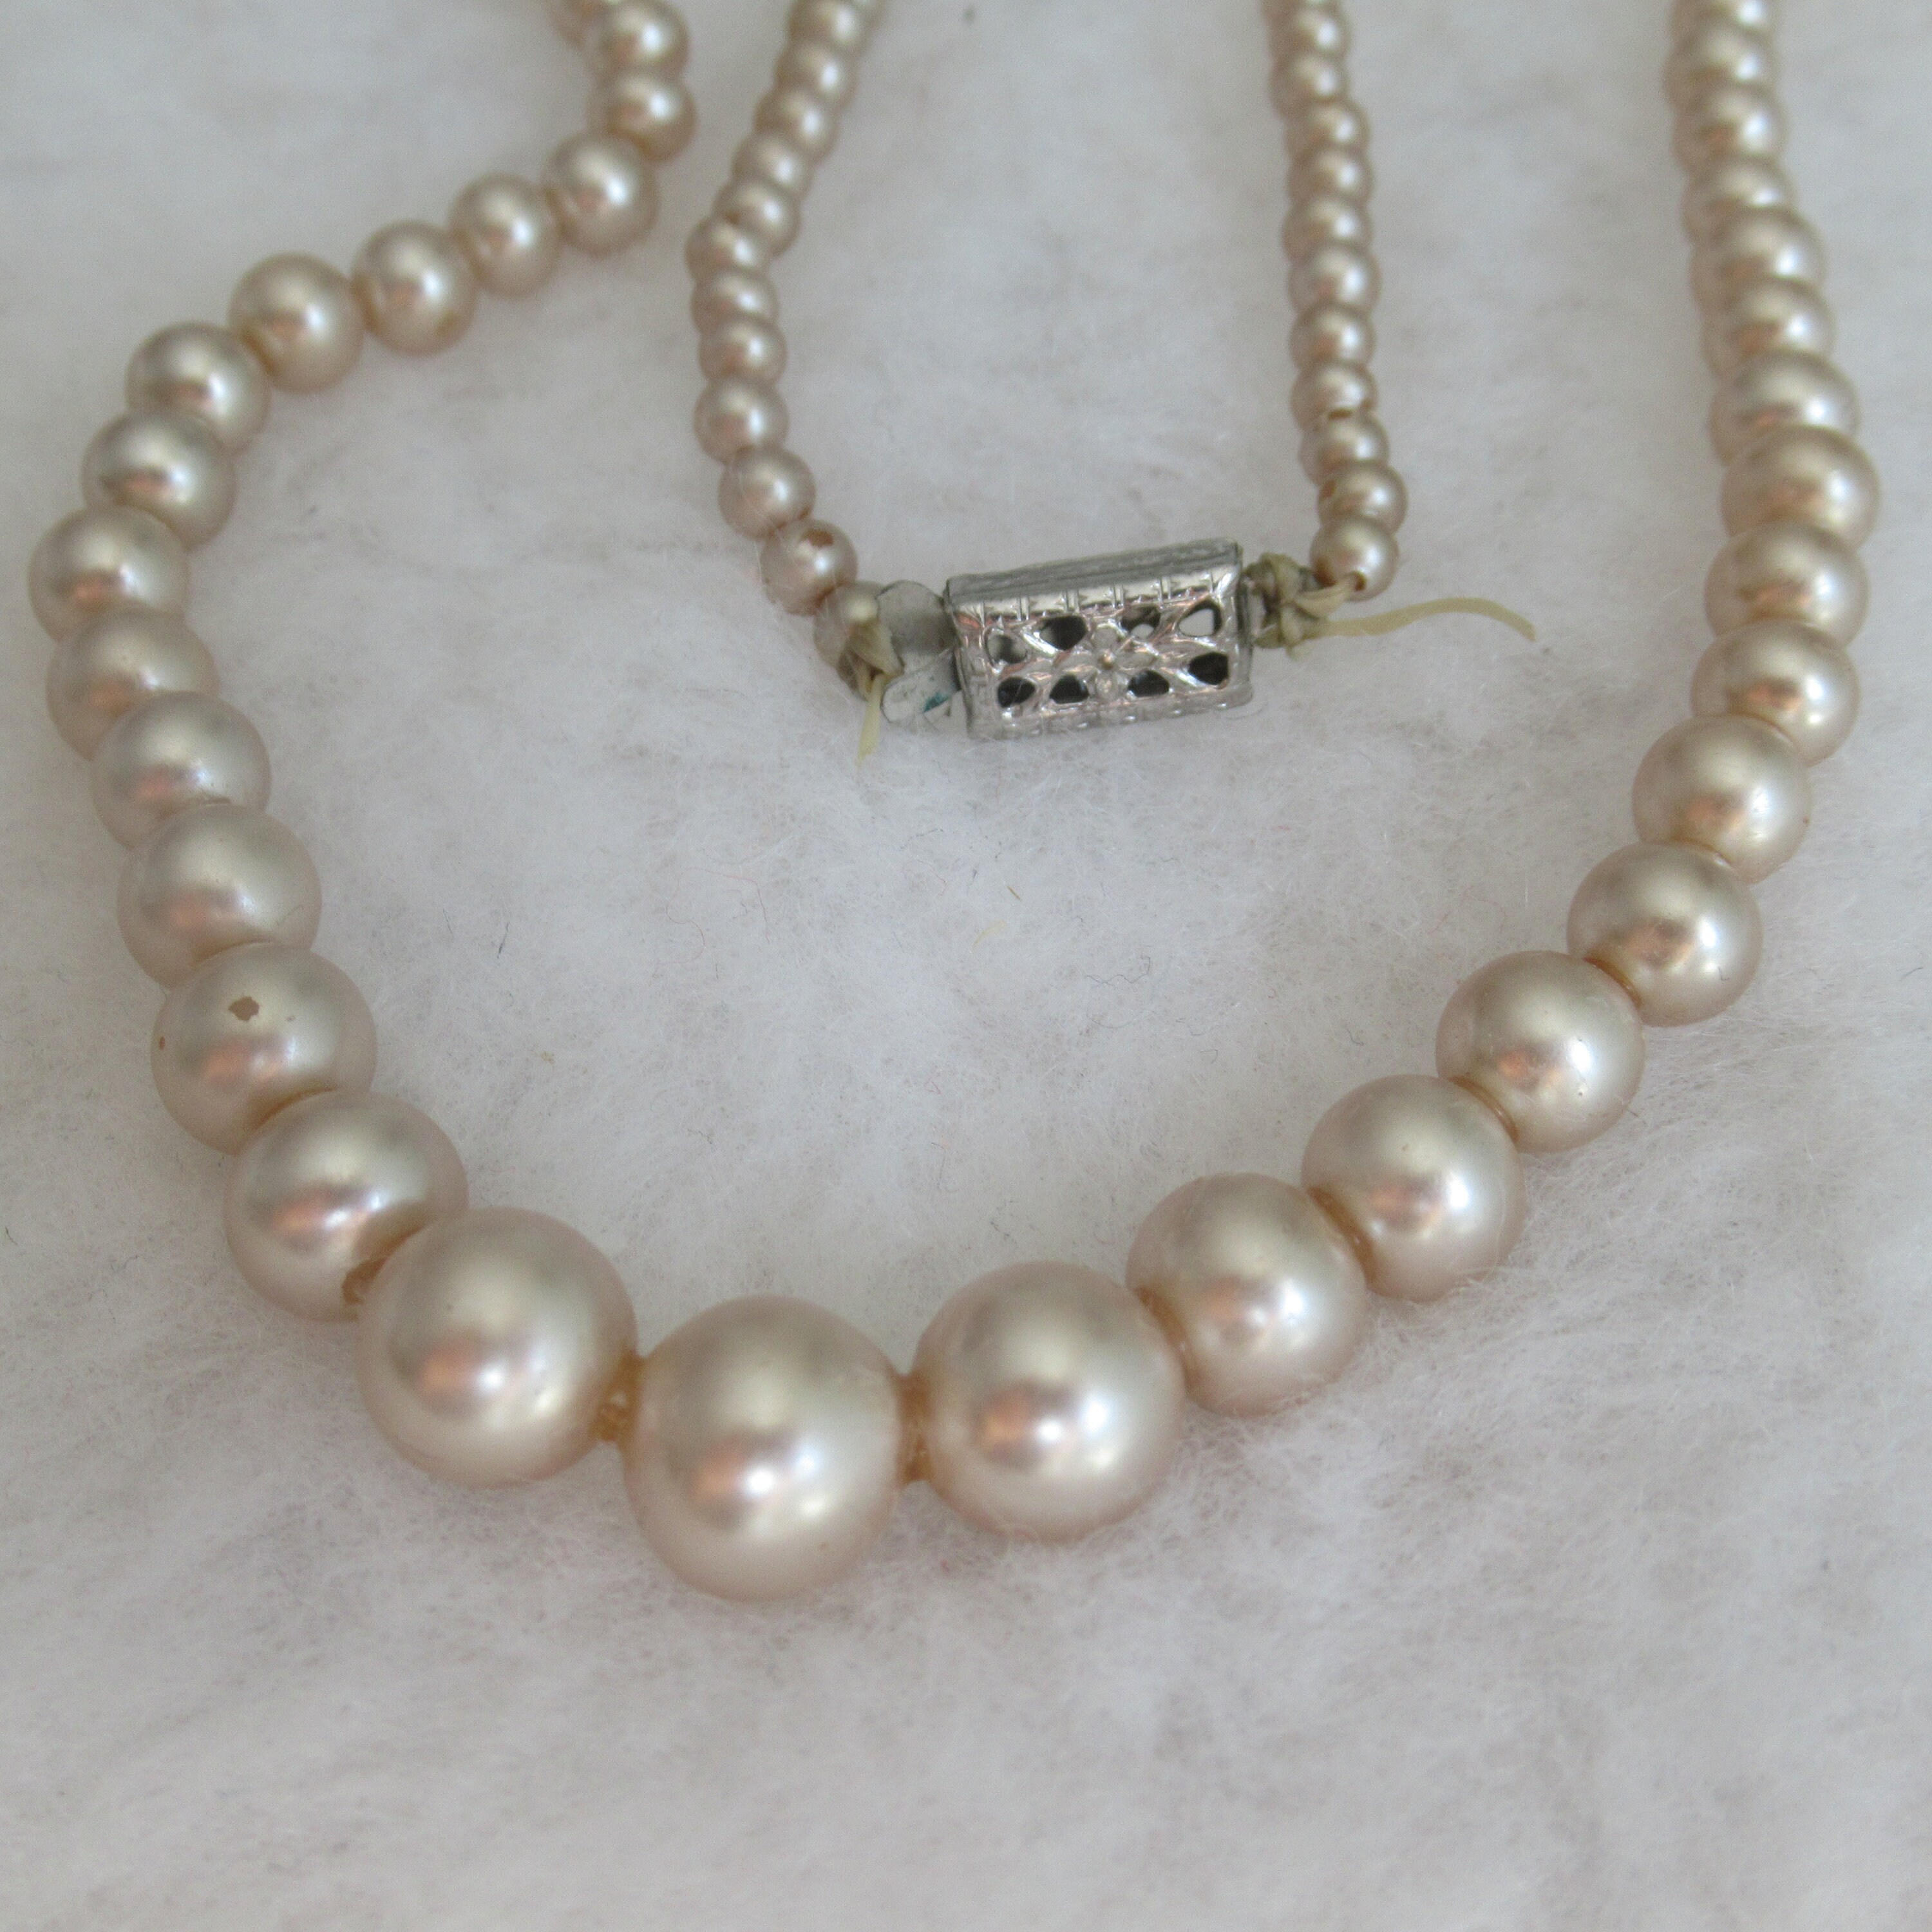 Vintage faux pearls: 125,700 ppm Lead. 90 ppm is unsafe. Please don't let  your children play with grandma's faux pearls!